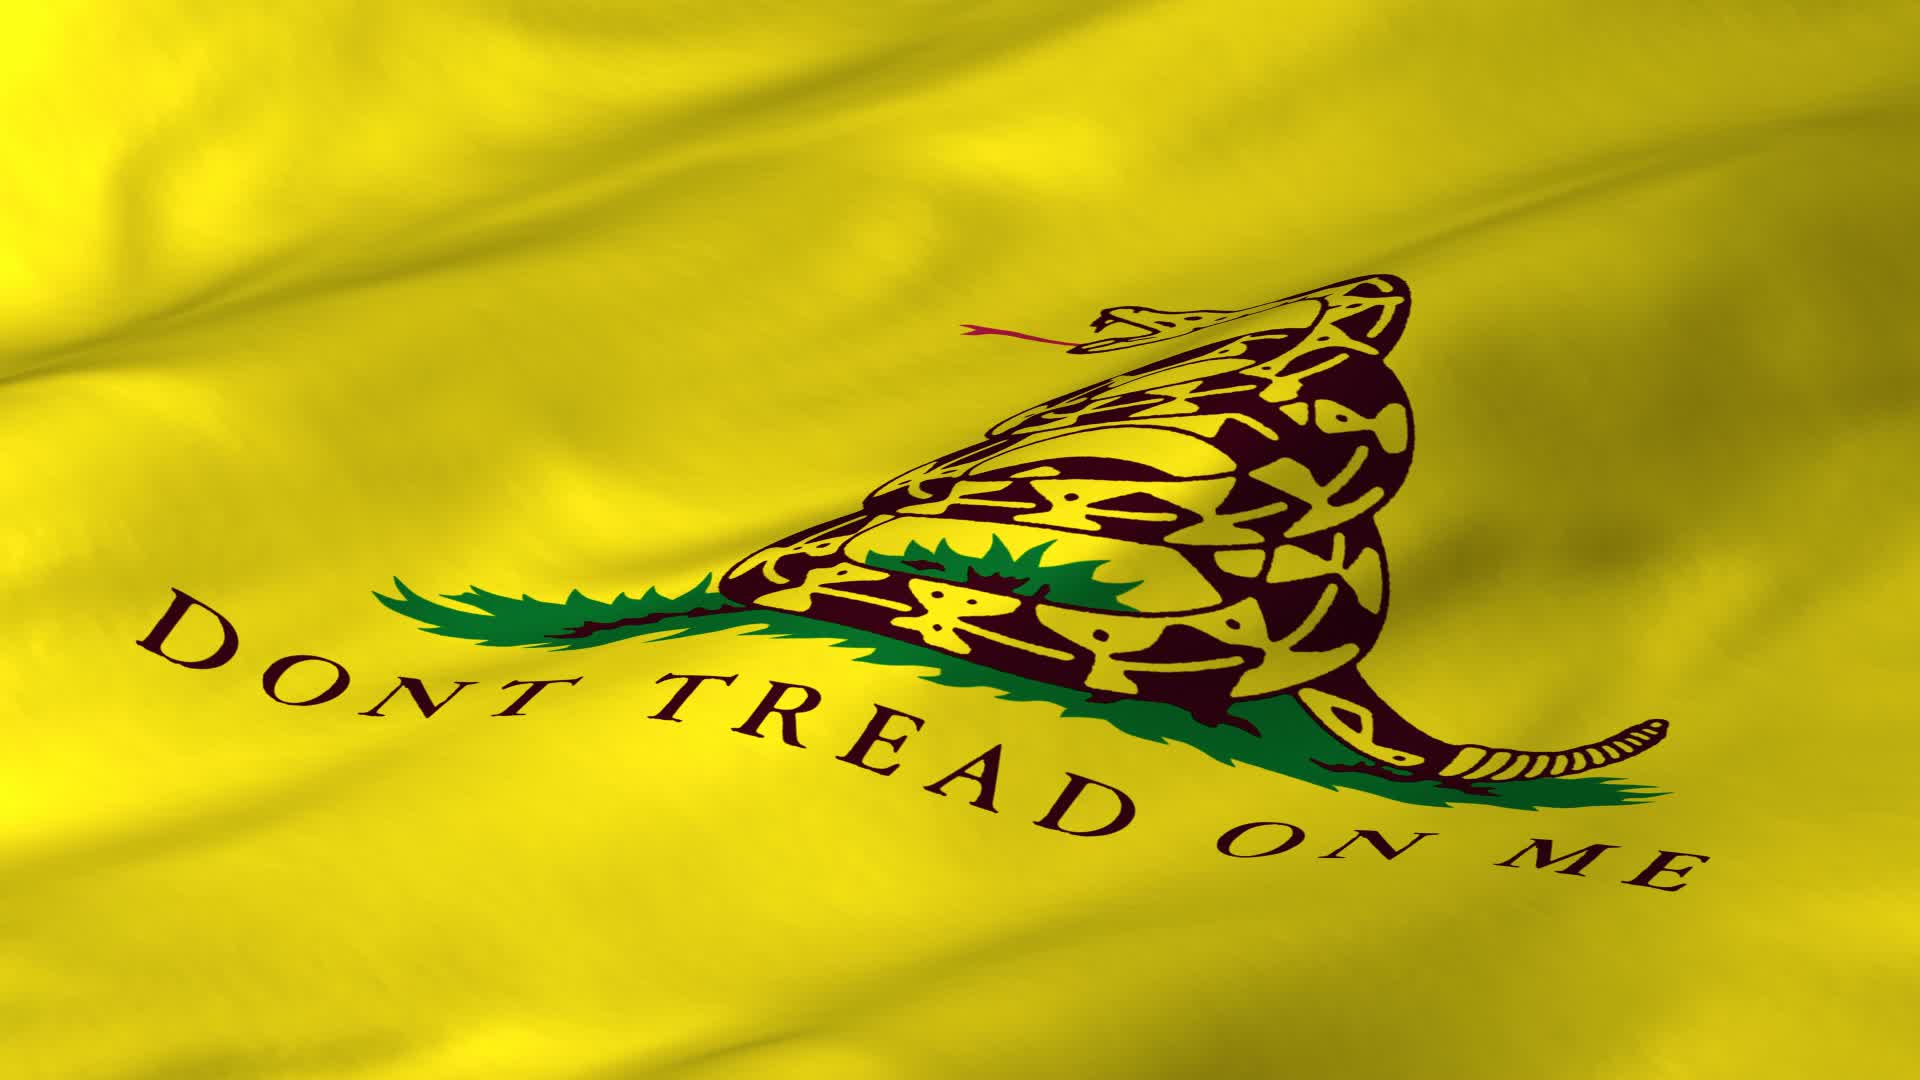 dont tread on me flag meaning now